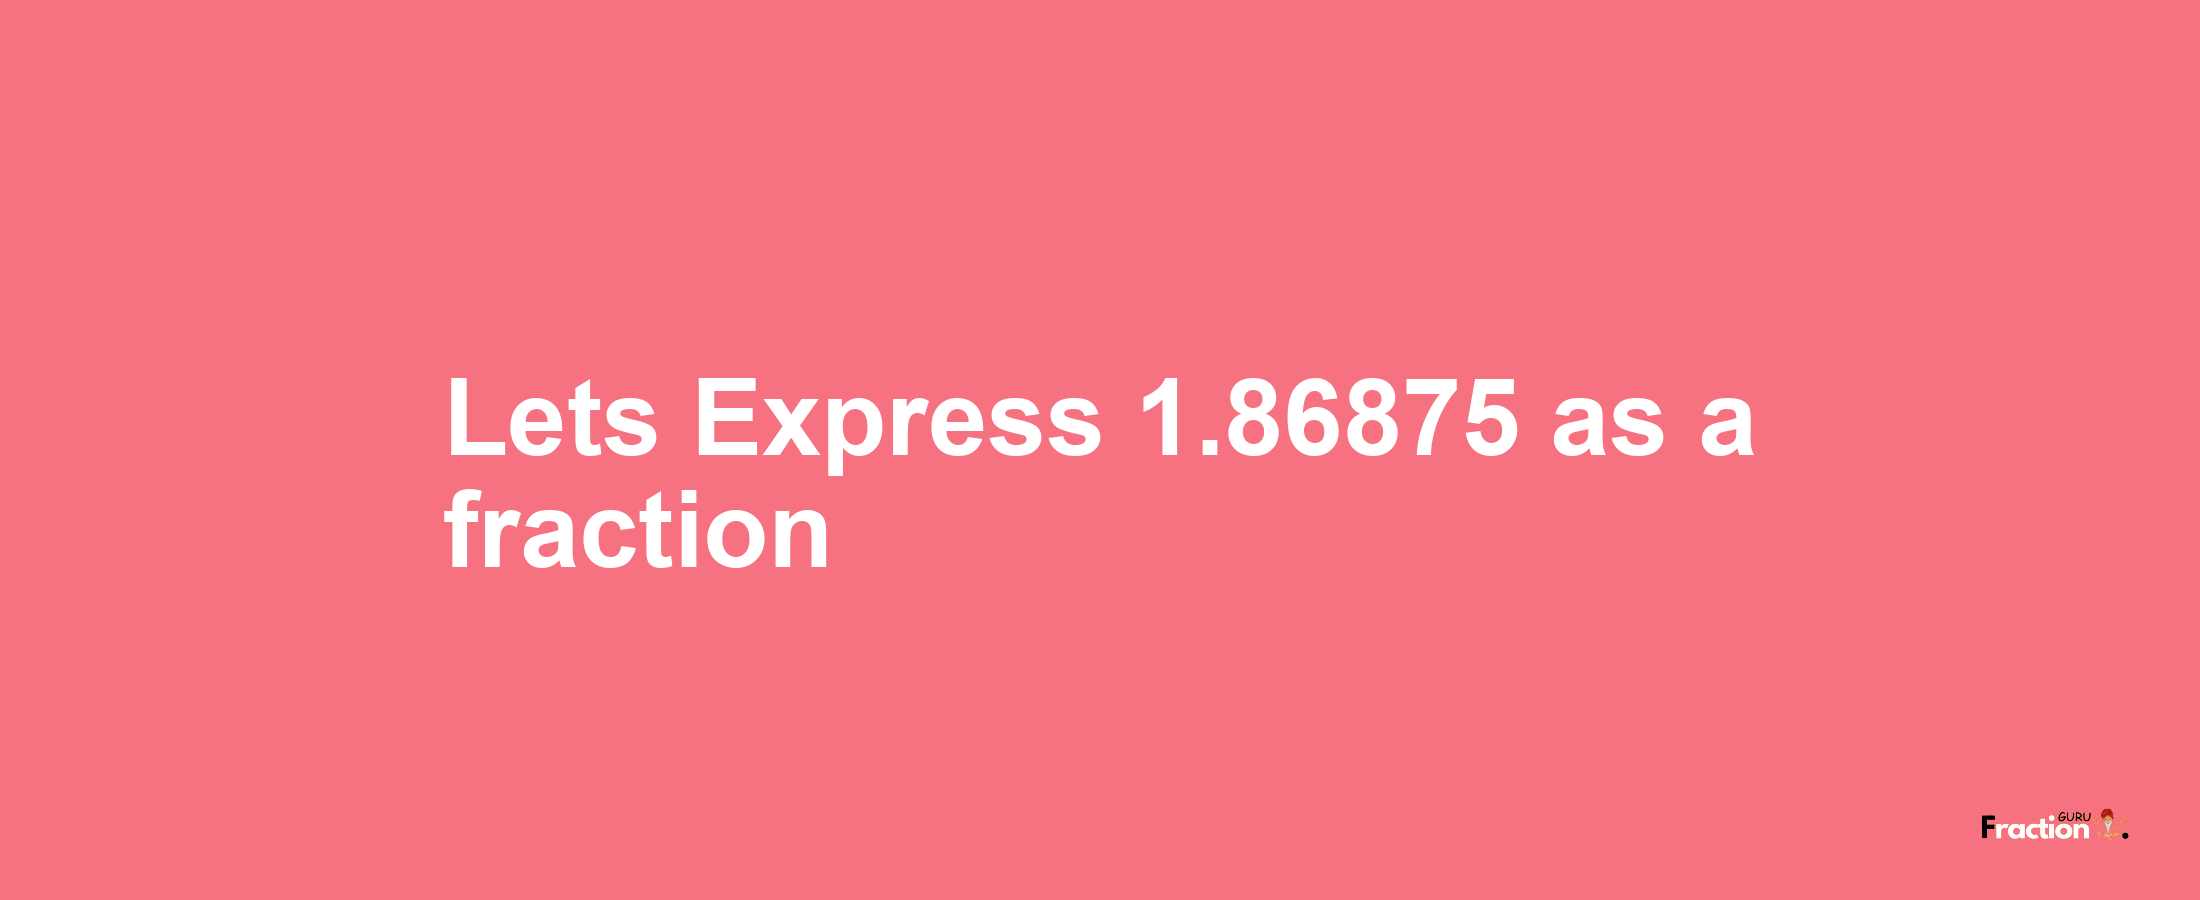 Lets Express 1.86875 as afraction